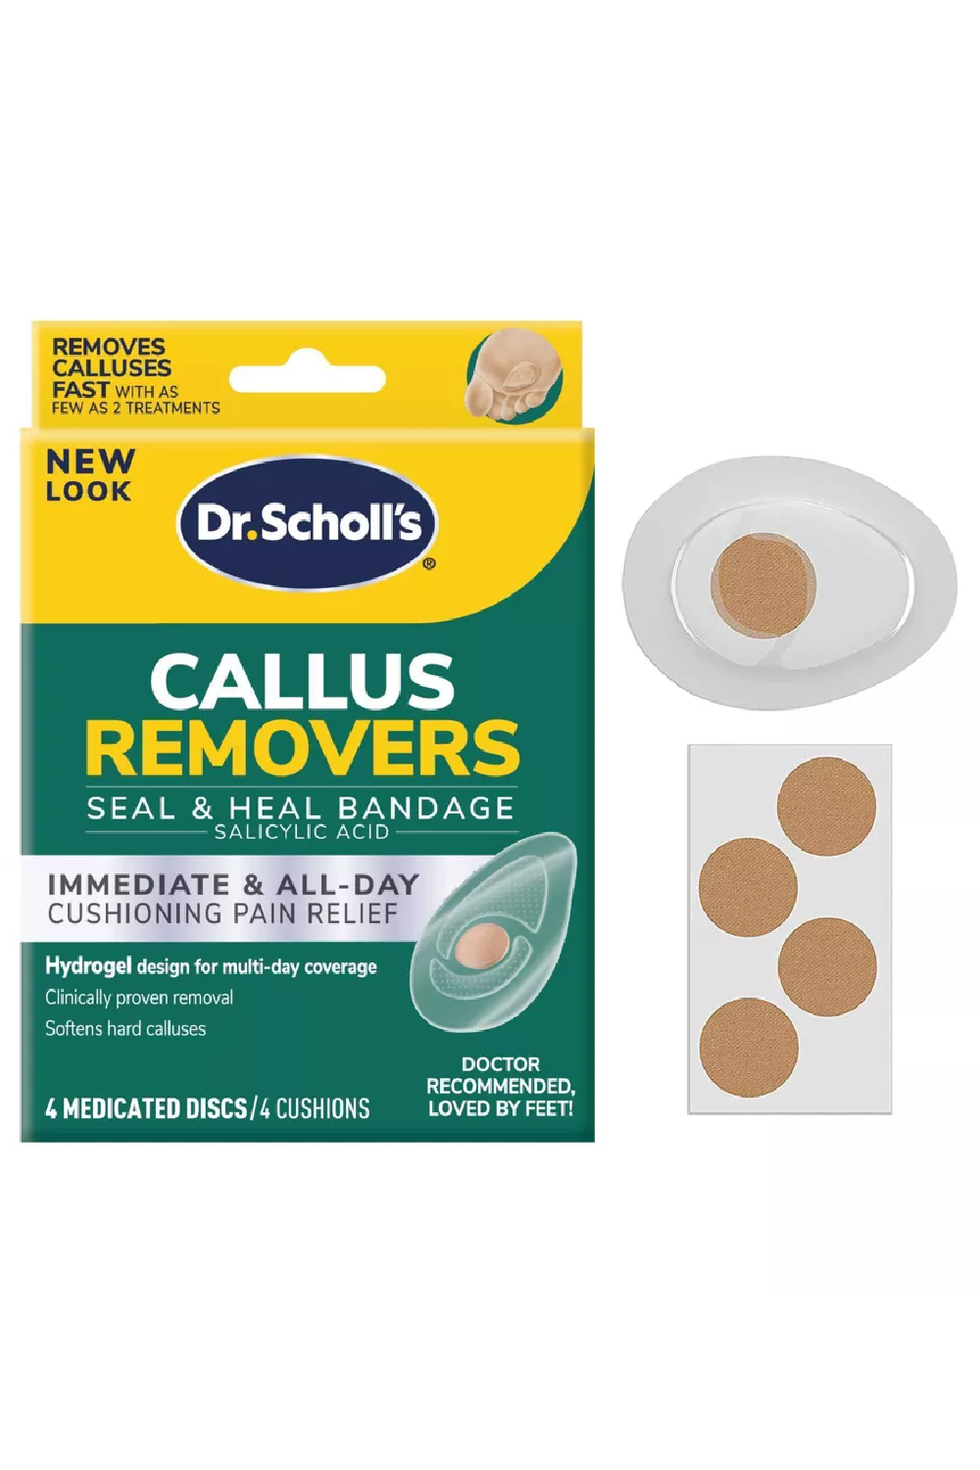 10 Best Callus Removers for Softer Feet, According to Experts